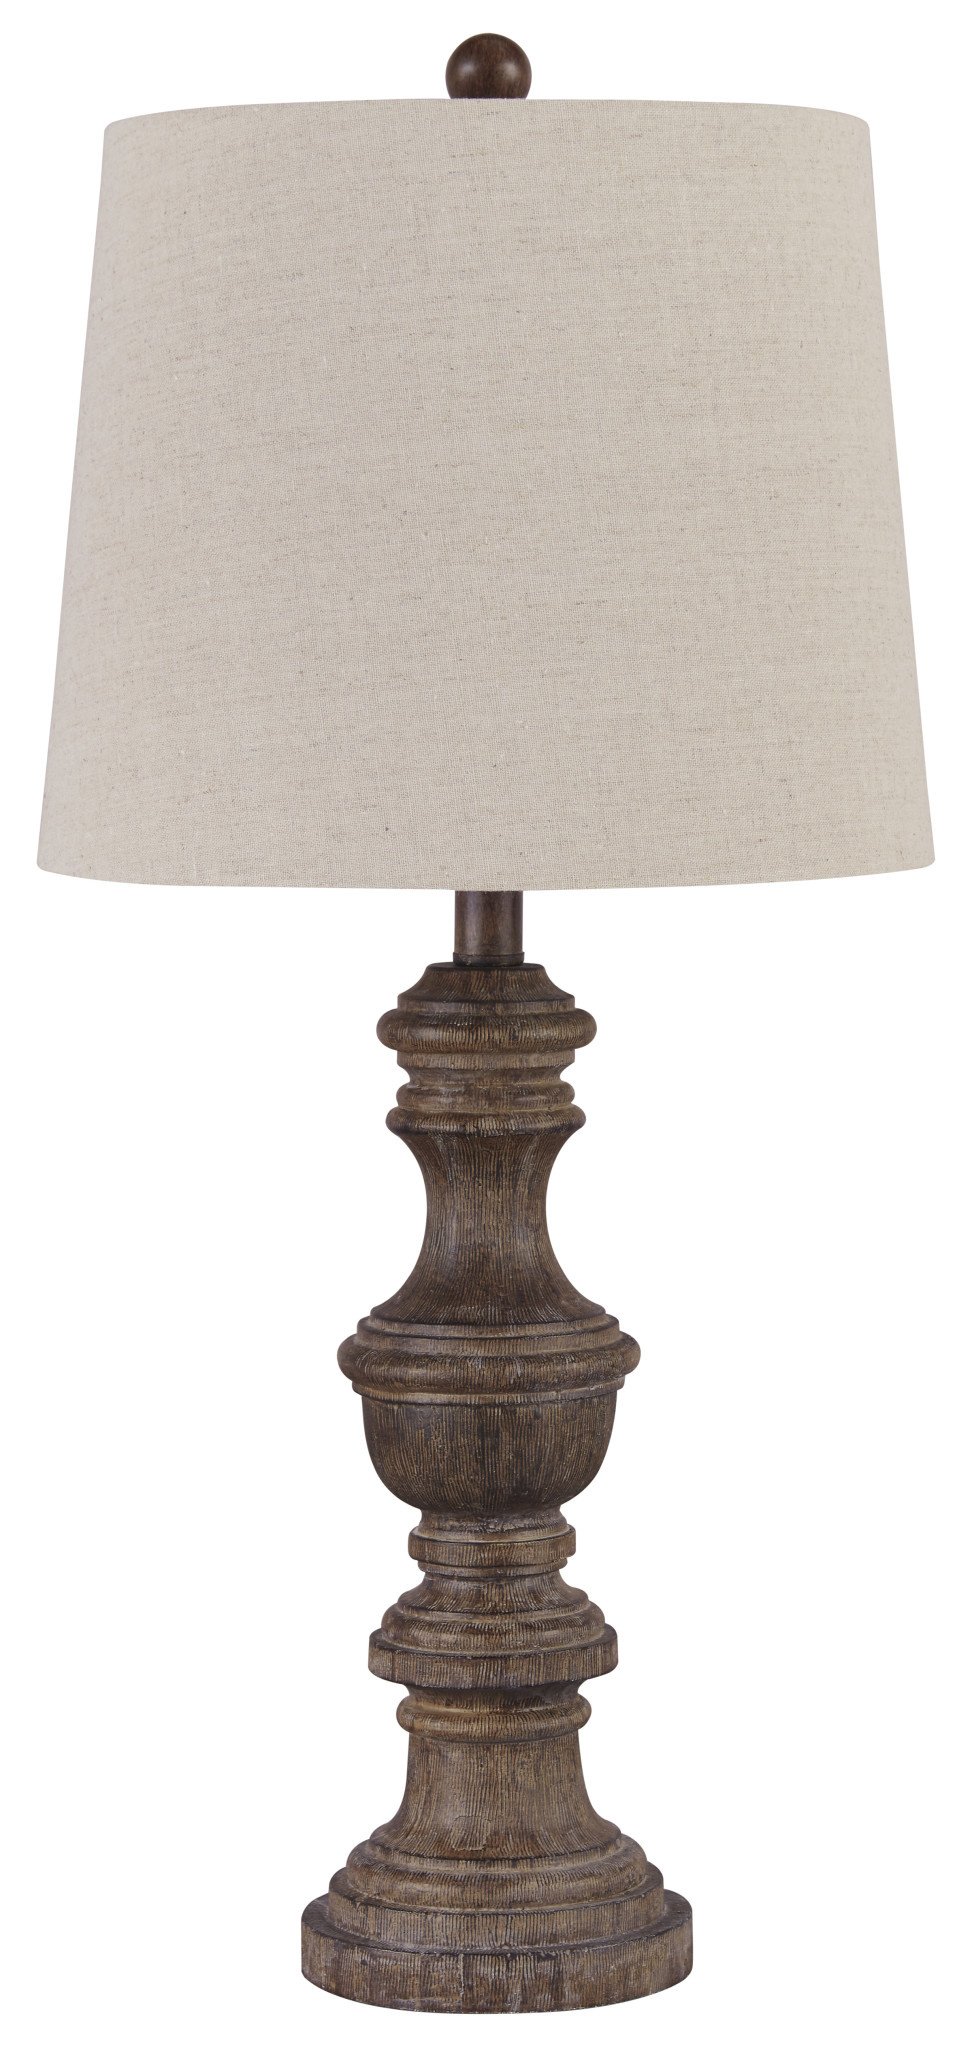 Signature Design "Magaly" Table Lamp- Brown- L276024